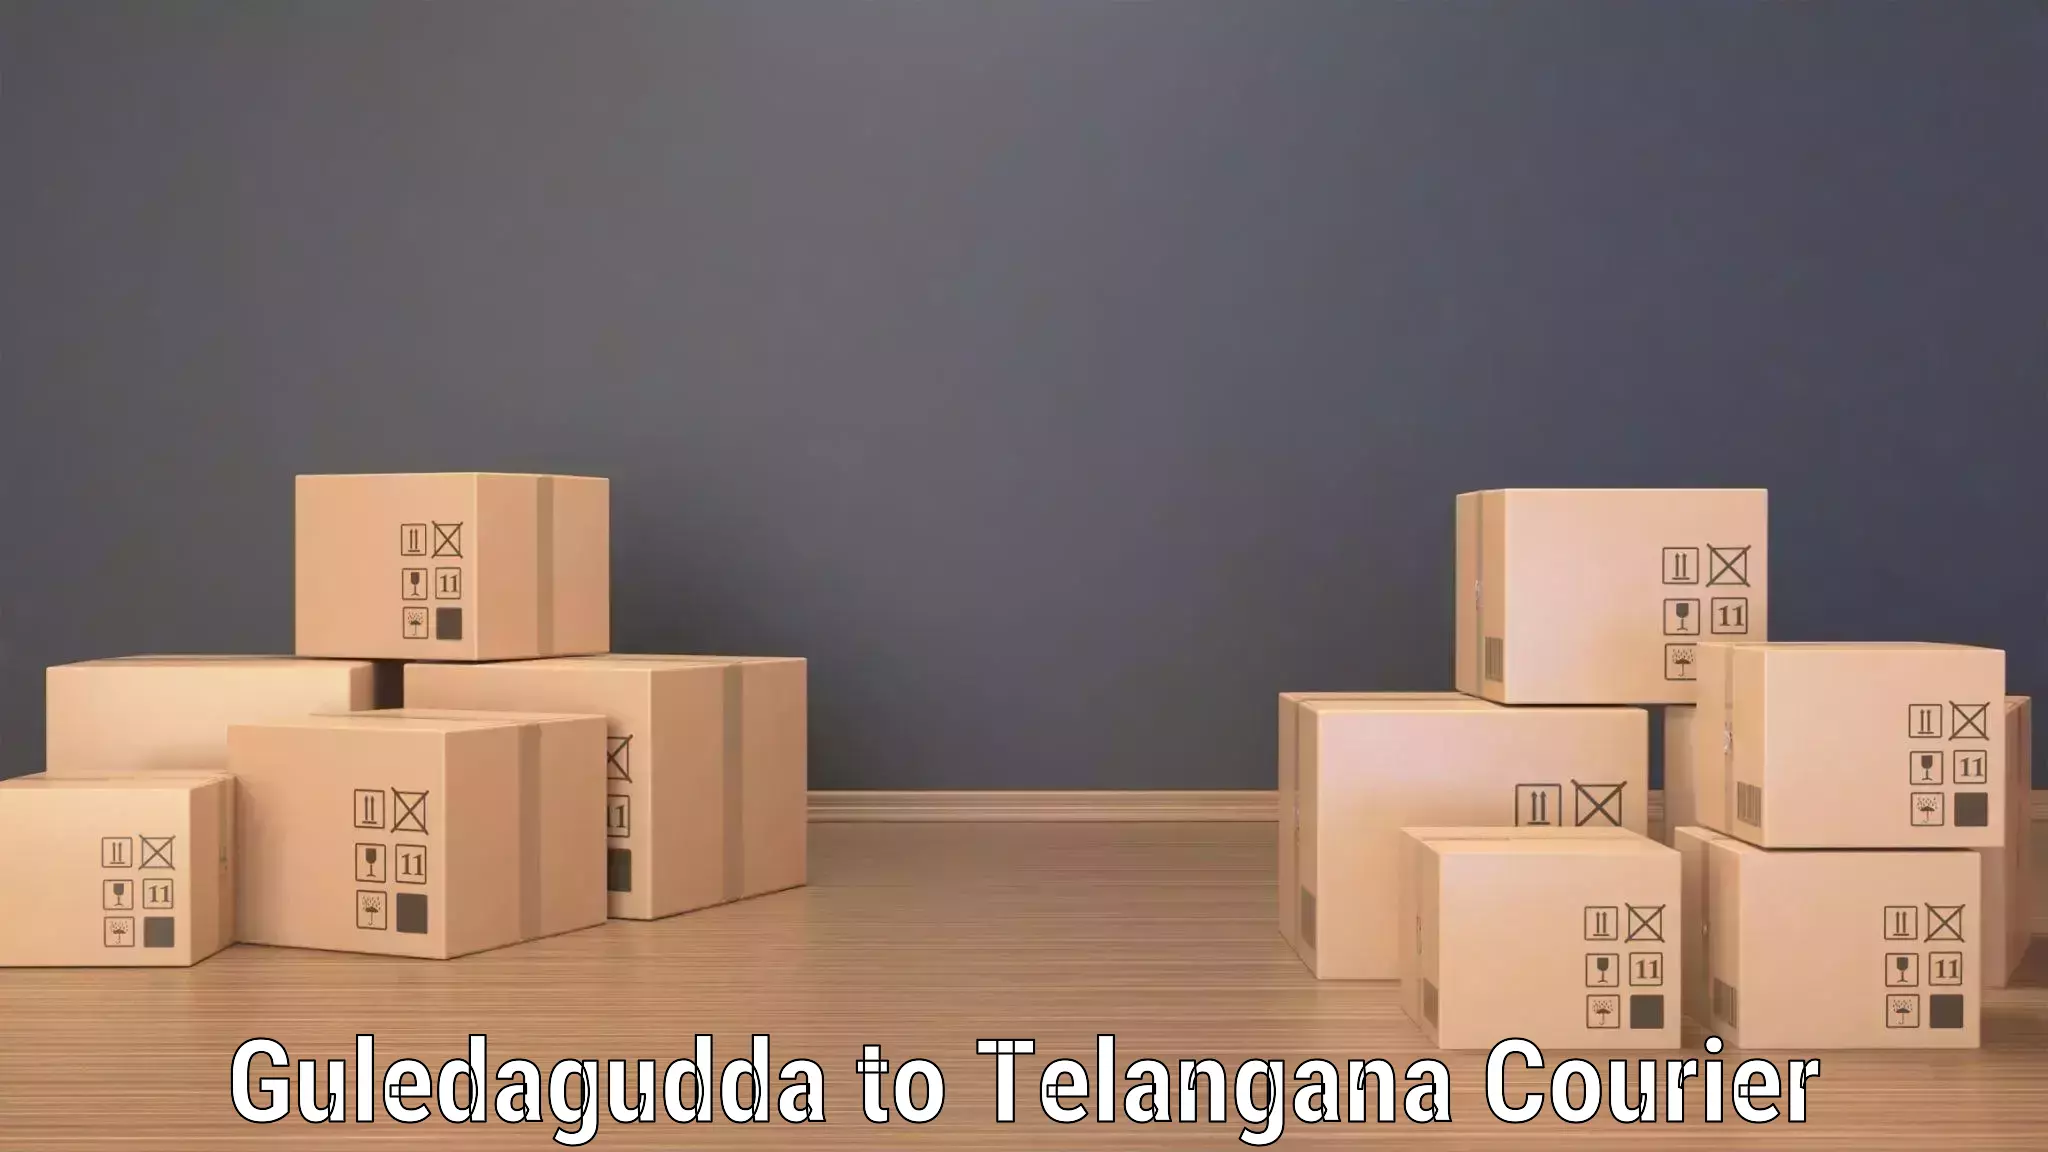 Reliable freight solutions in Guledagudda to Shankarpalle